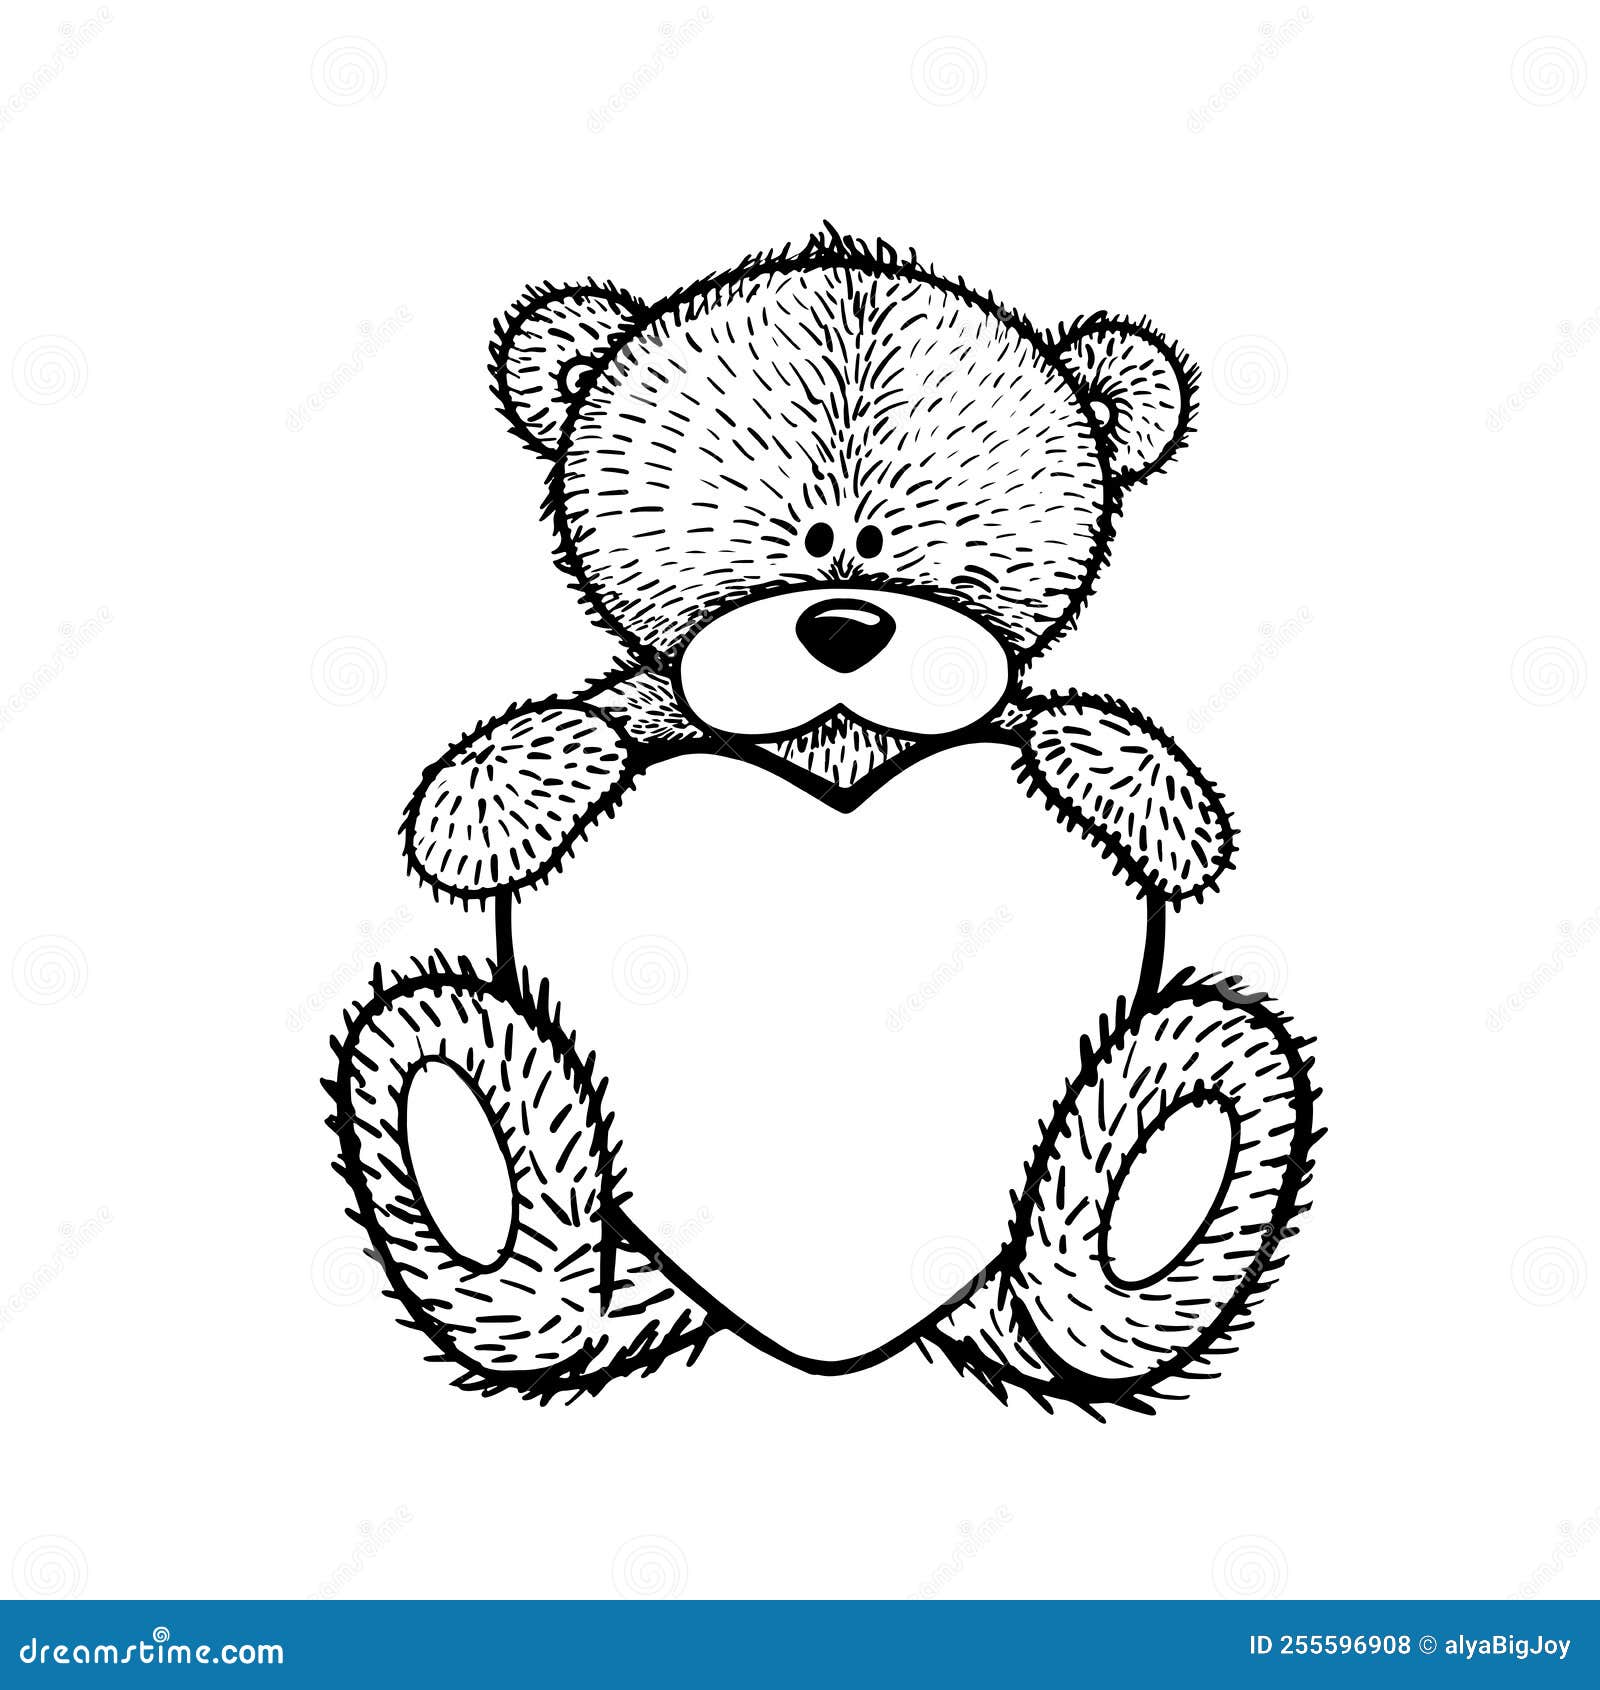 Black And White Teddy Bear Drawing